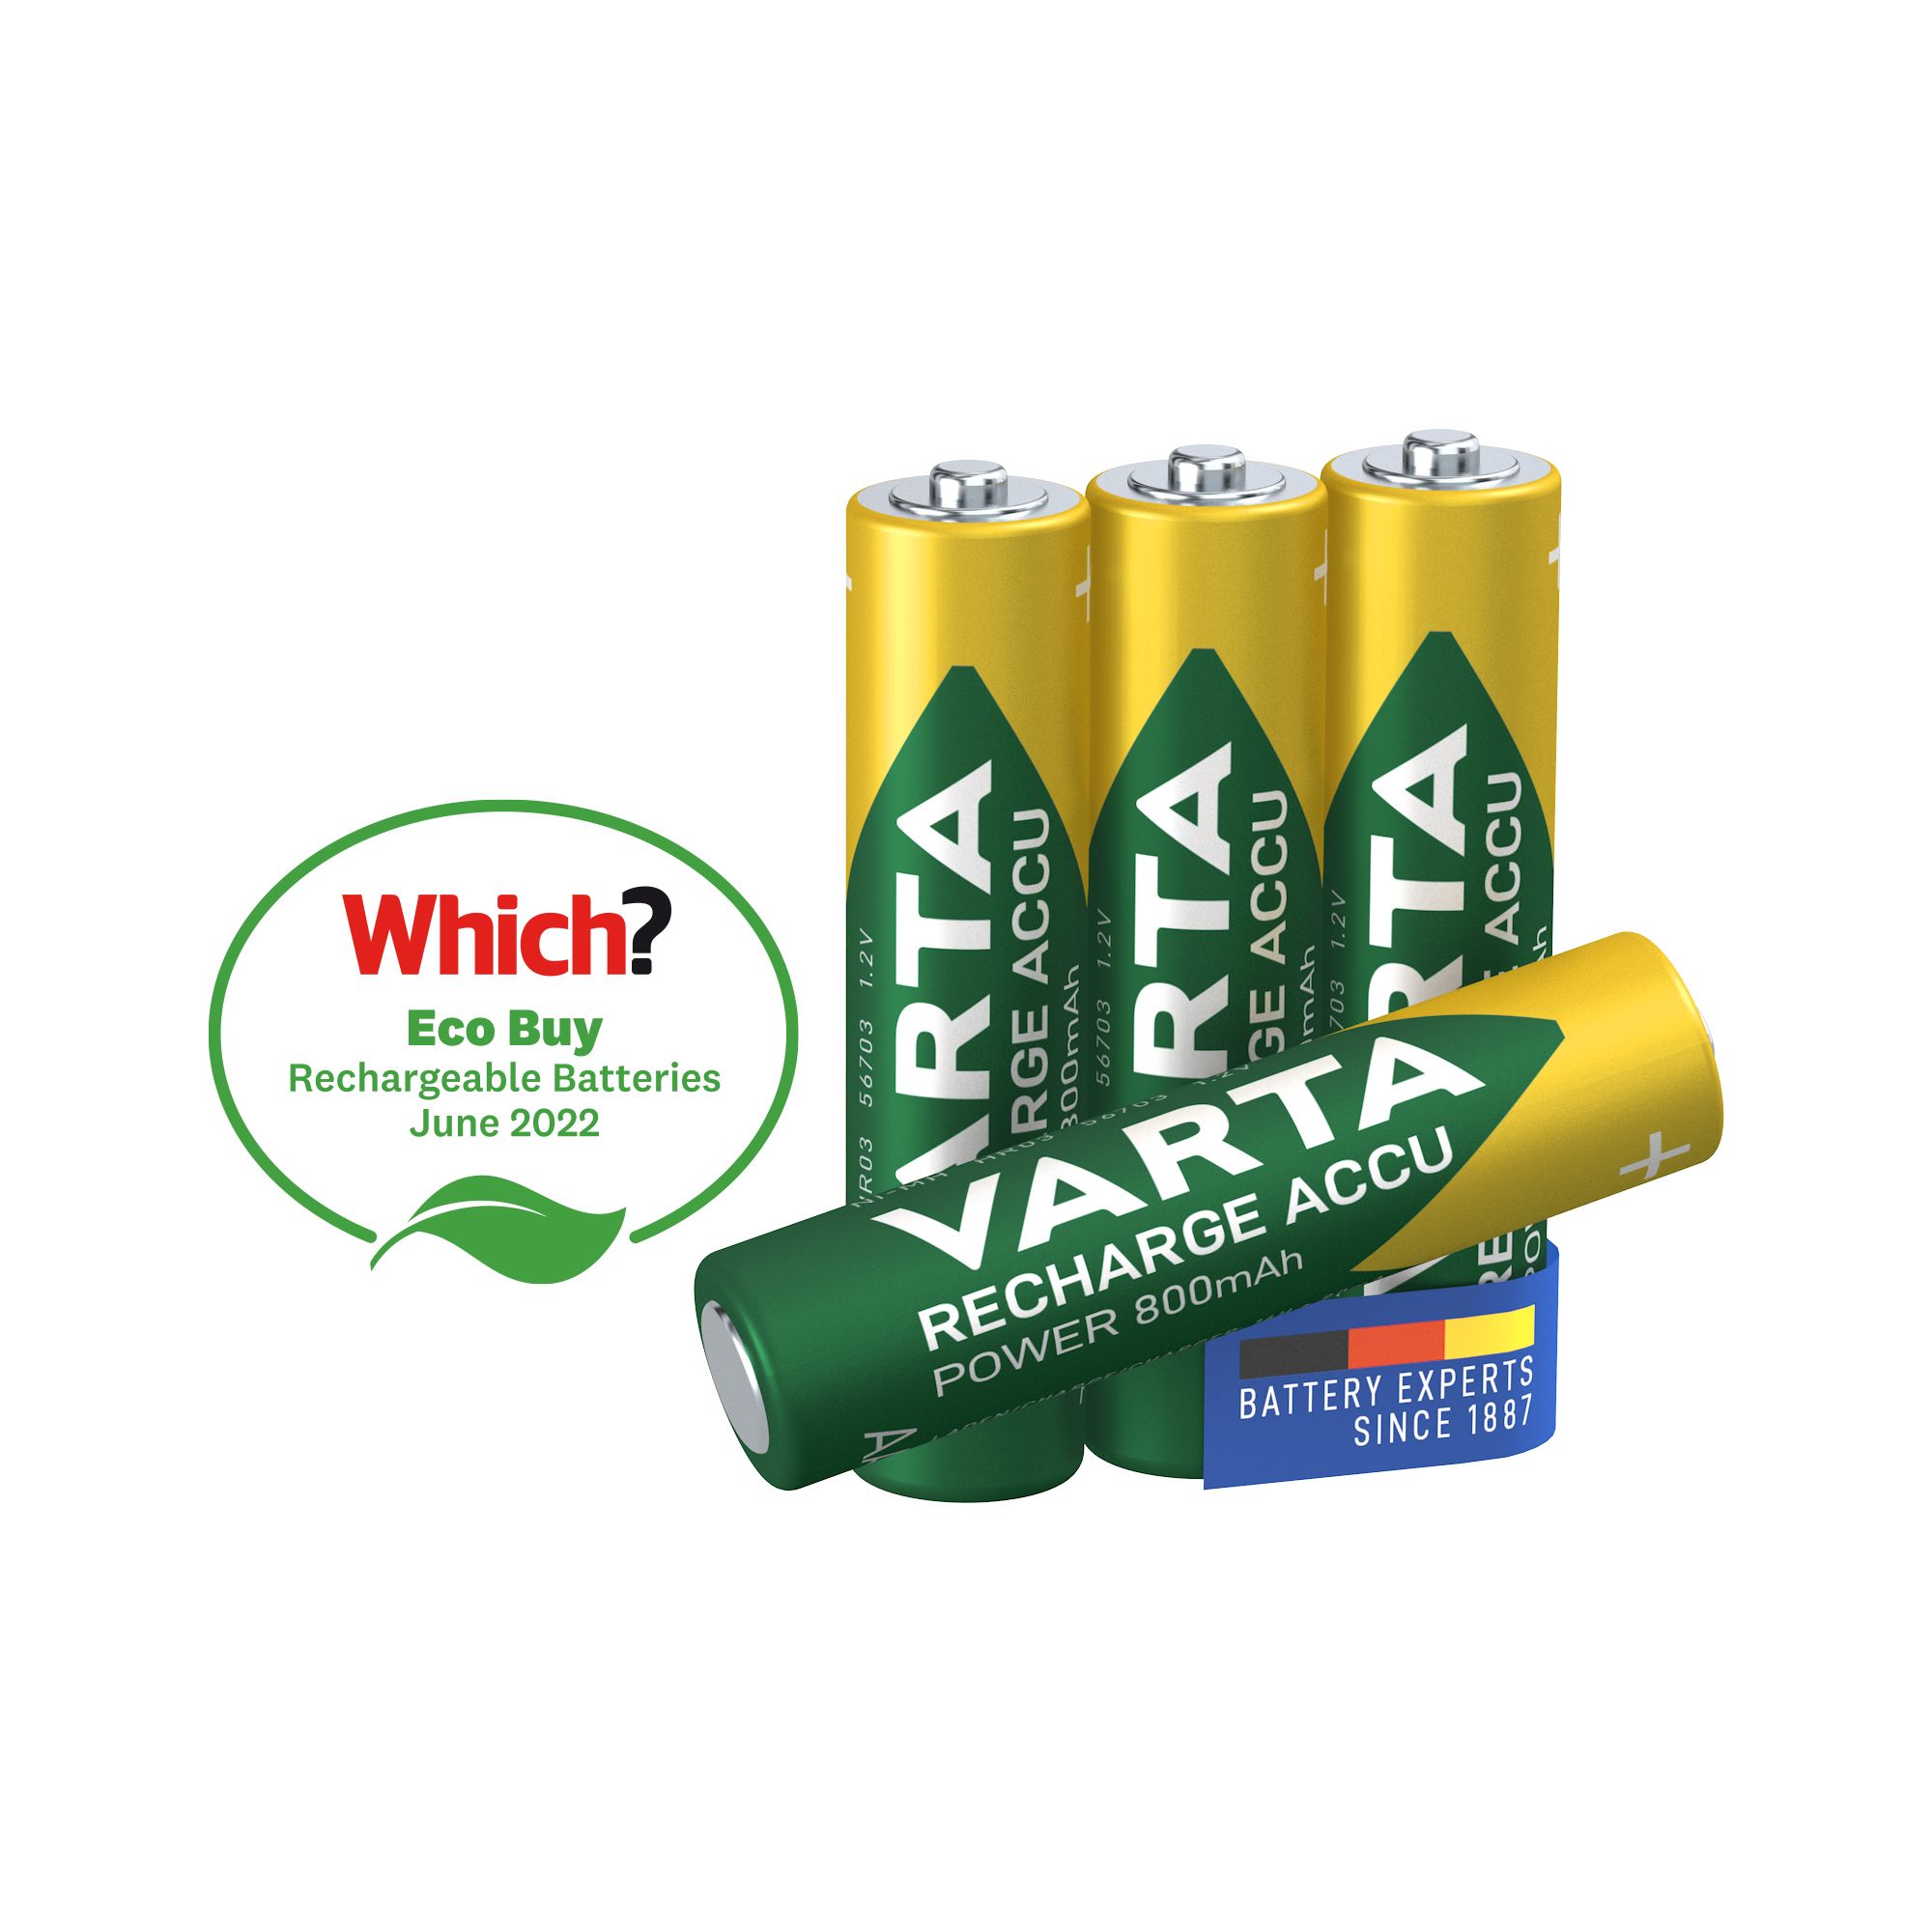 Varta Recharge ACCU Power Rechargeable AAA (LR03) Battery, Pack of 4 | DIY  at B&Q